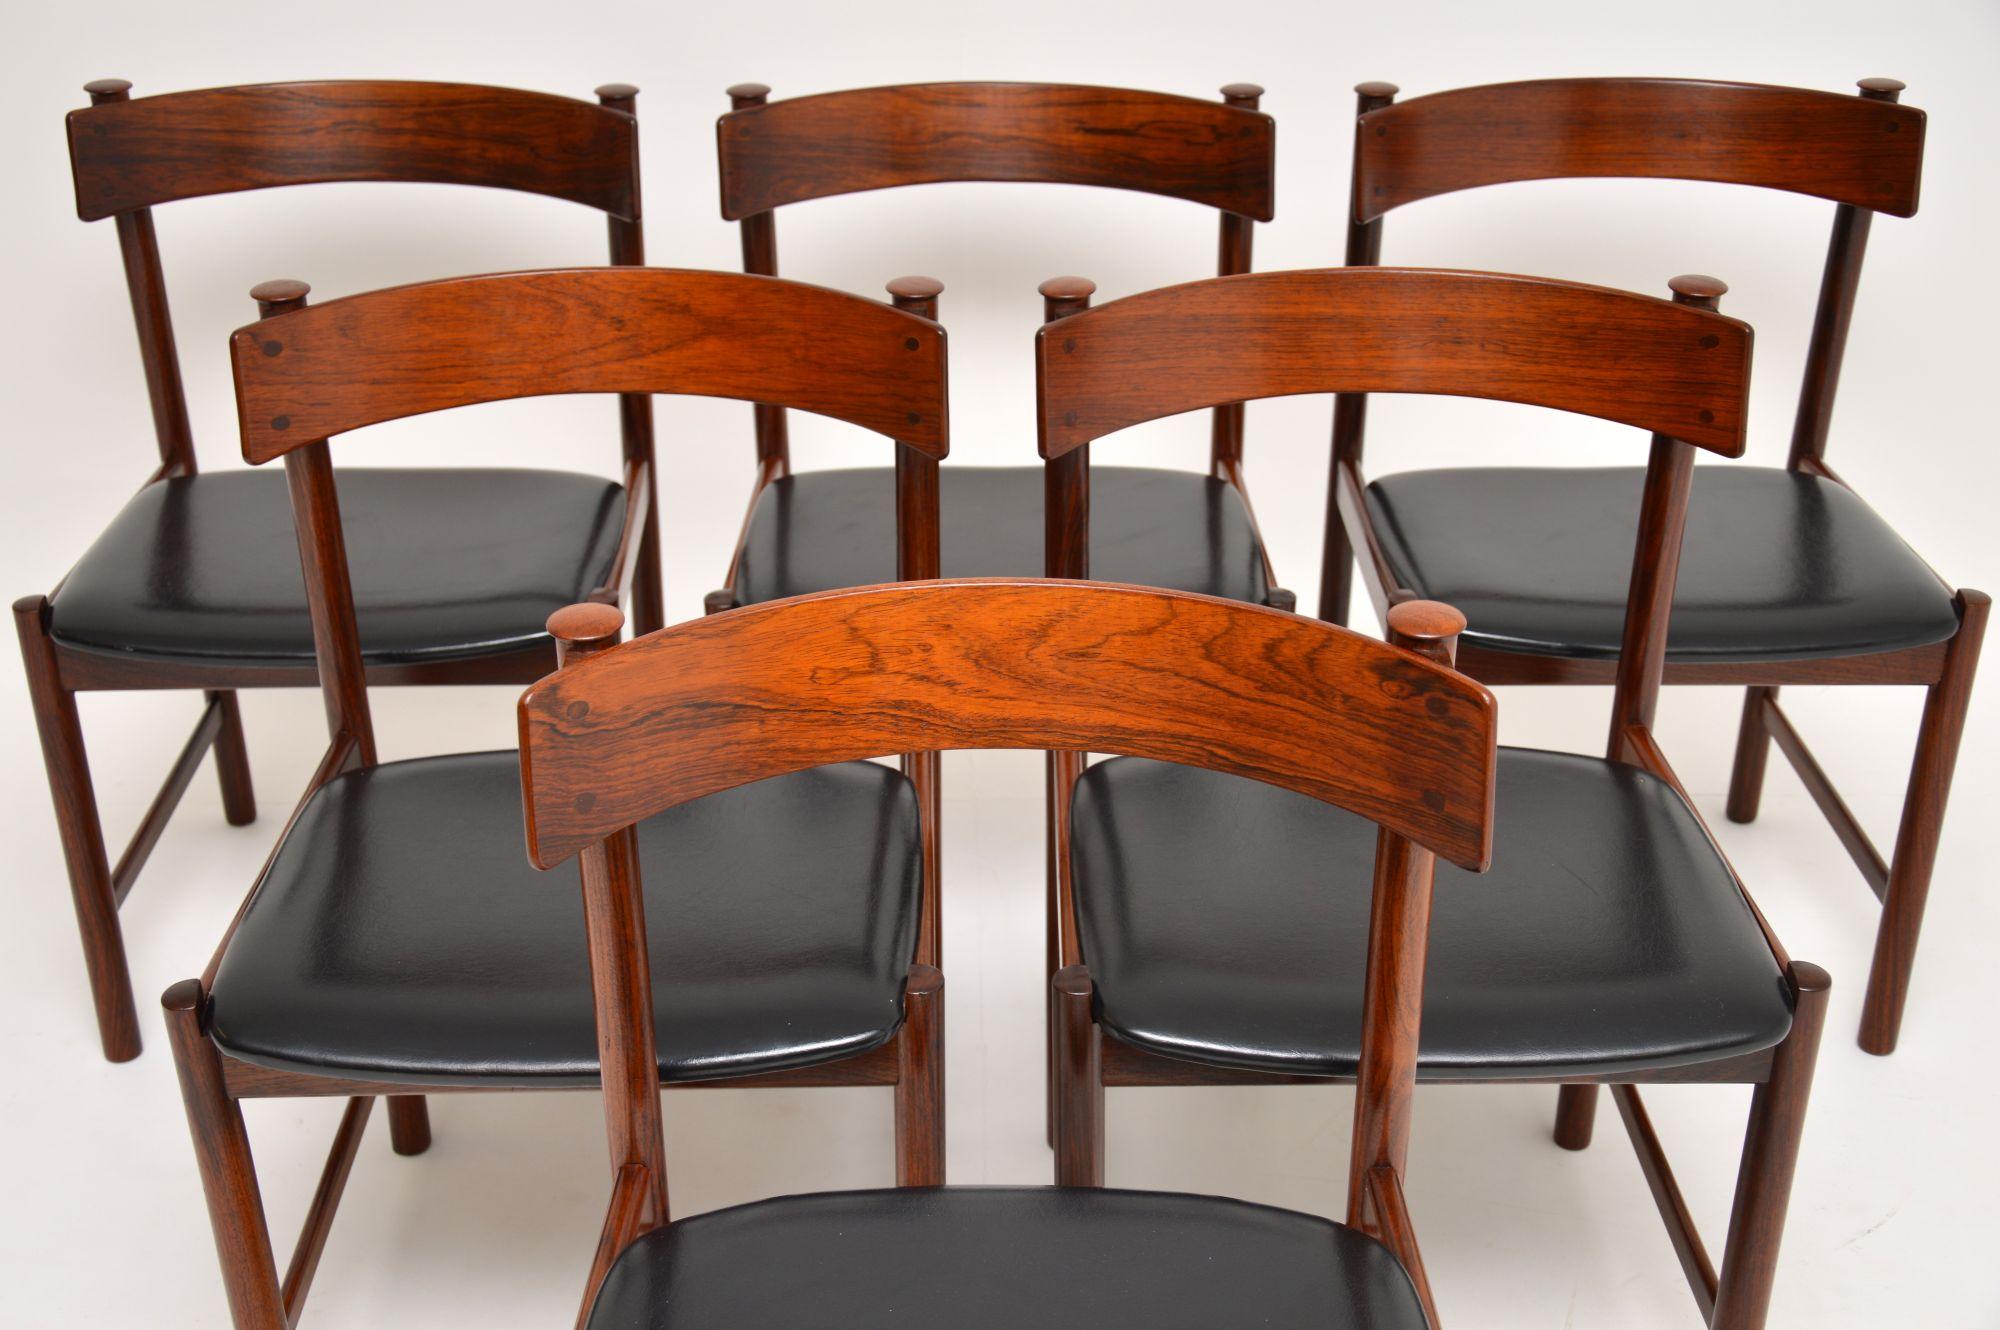 A stunning and very rare set of Danish dining chairs. These date from the 1960s, they have an extremely beautiful design and are of excellent quality. As of yet we haven’t identified the designer, but we’re sure they are by someone of high regard.